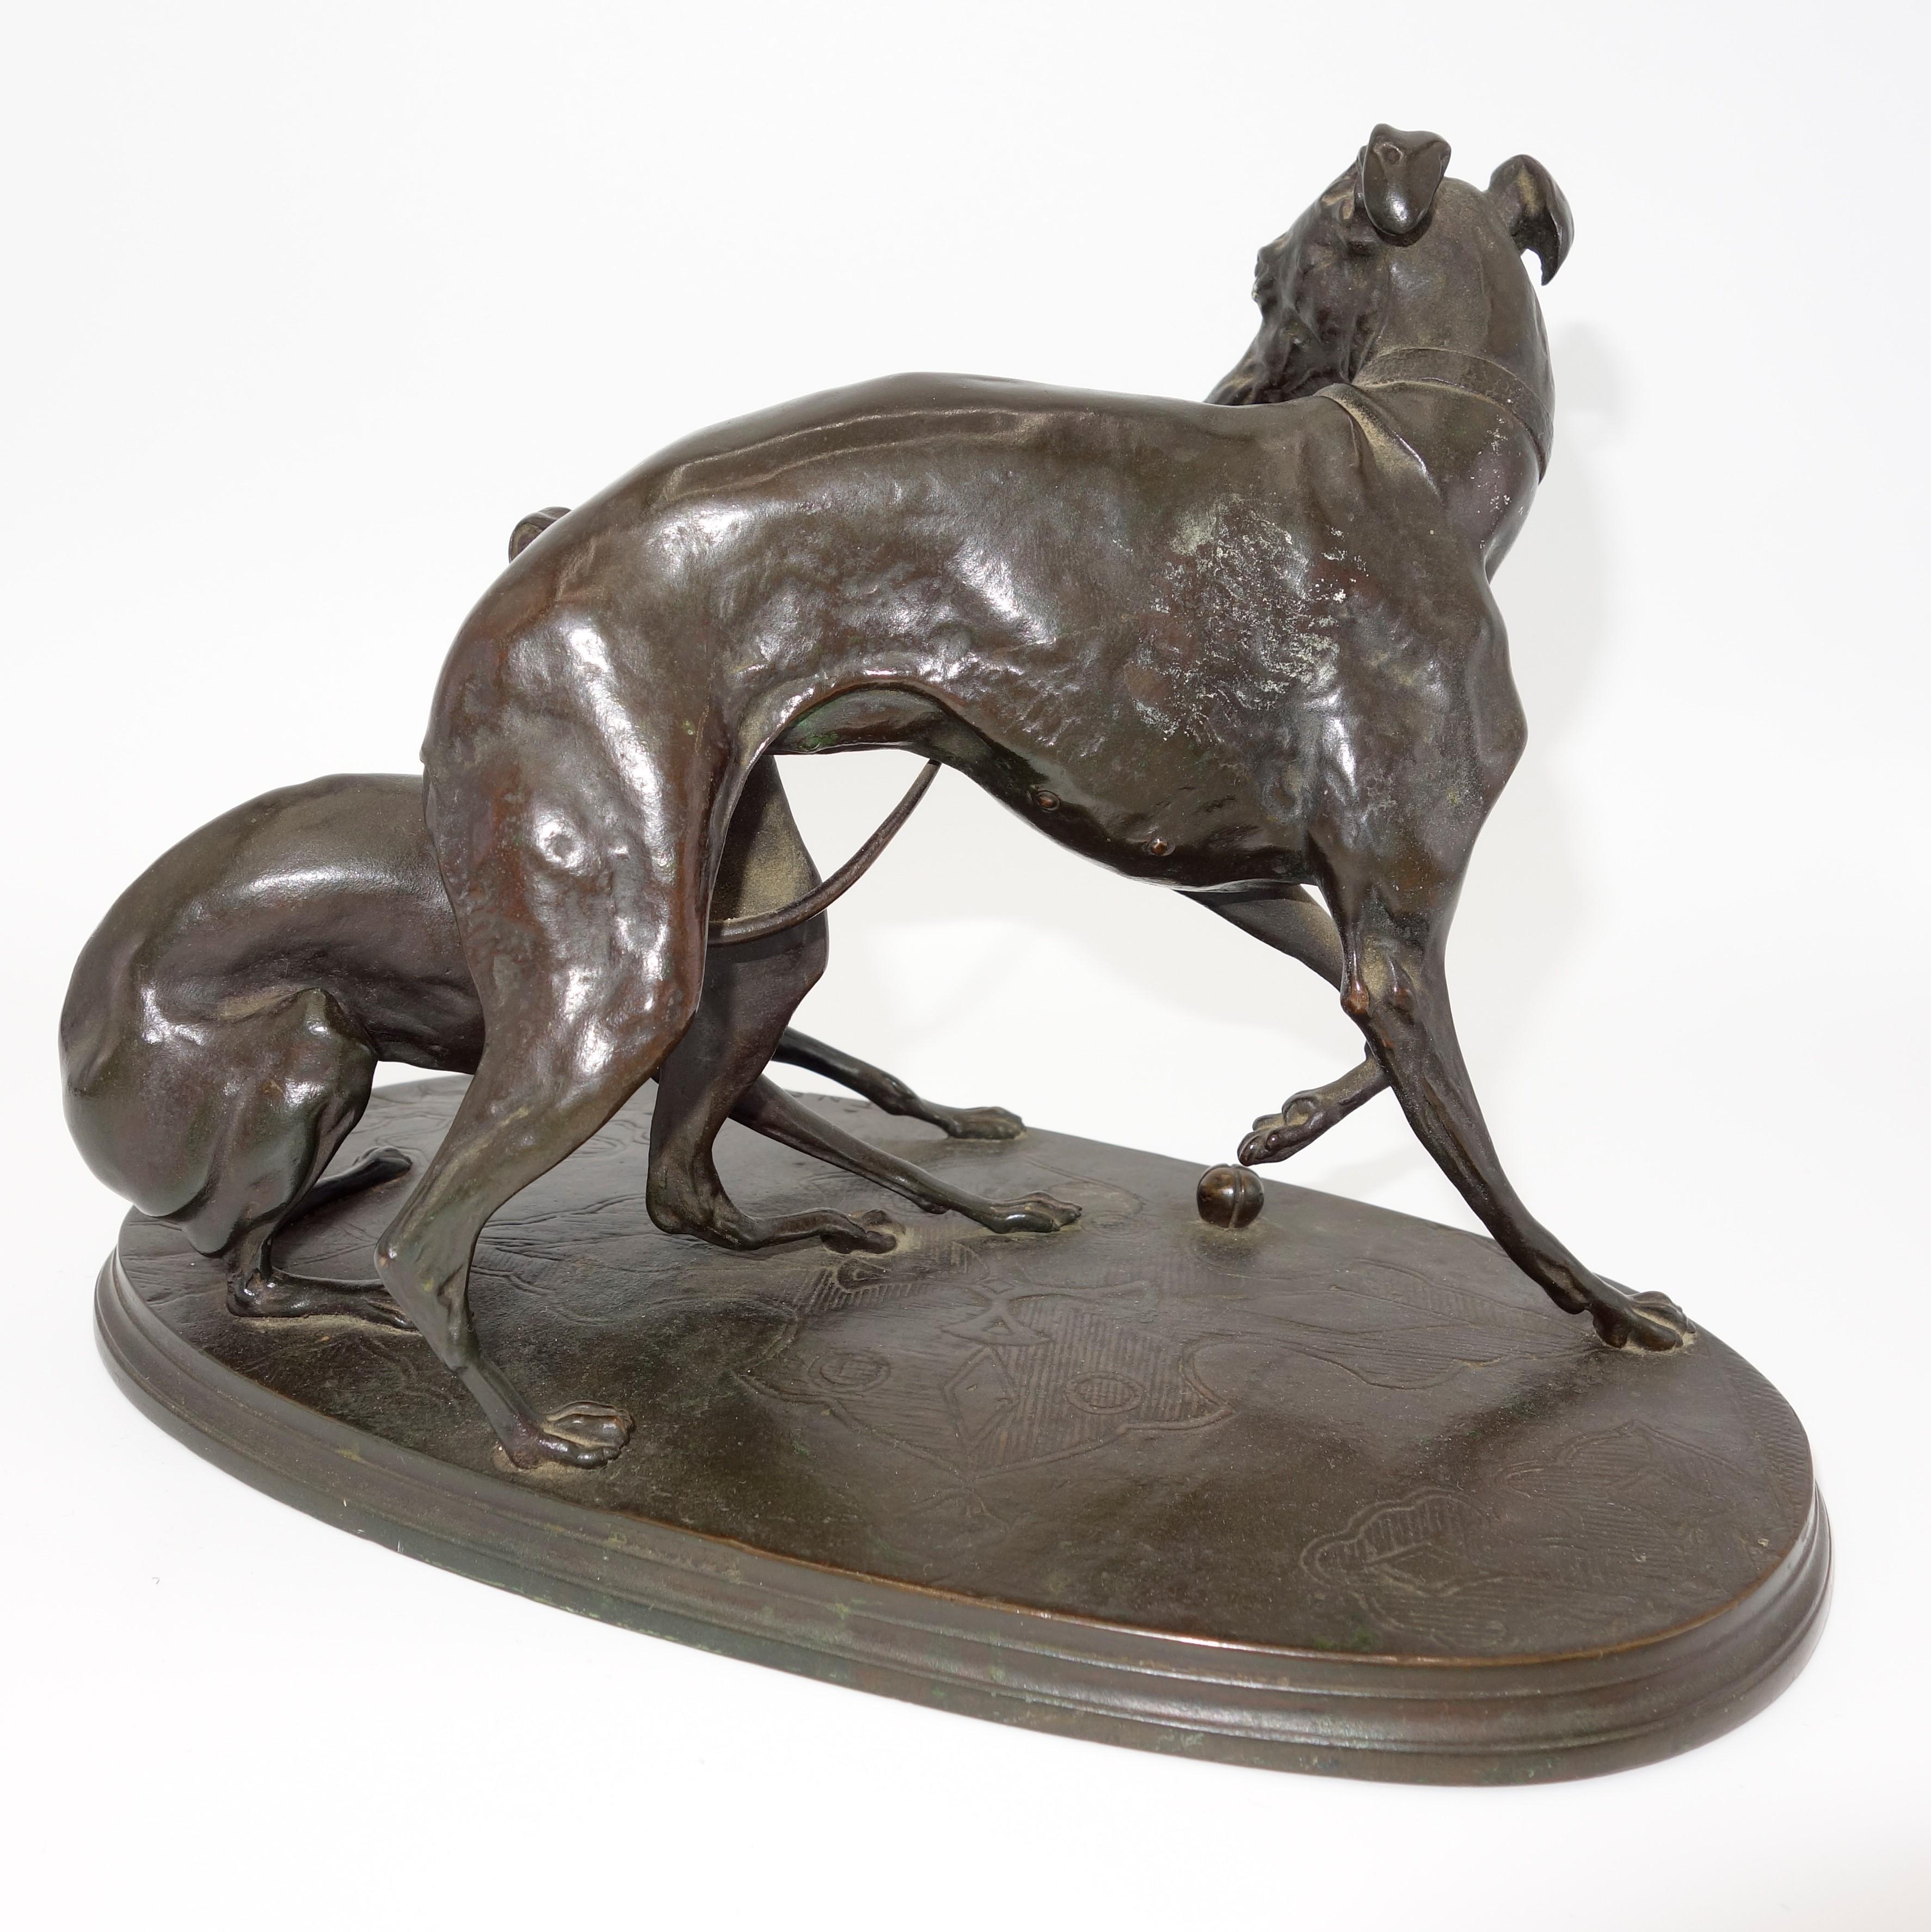 A bronze group of two whippet dogs at play  - Sculpture by Pierre Jules Mêne